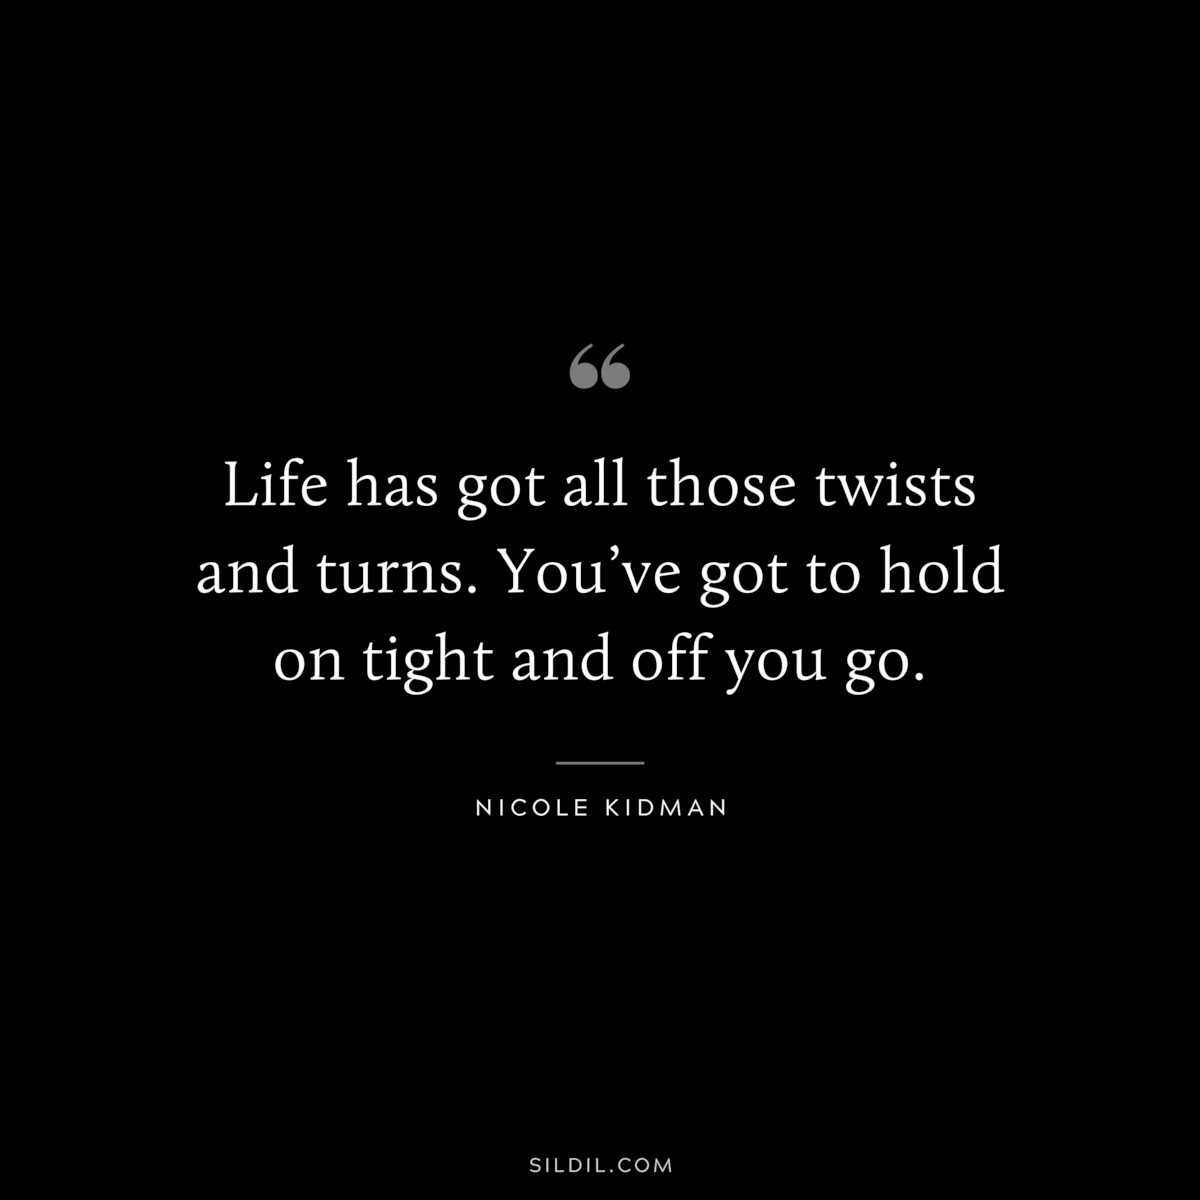 Life has got all those twists and turns. You’ve got to hold on tight and off you go. ― Nicole Kidman